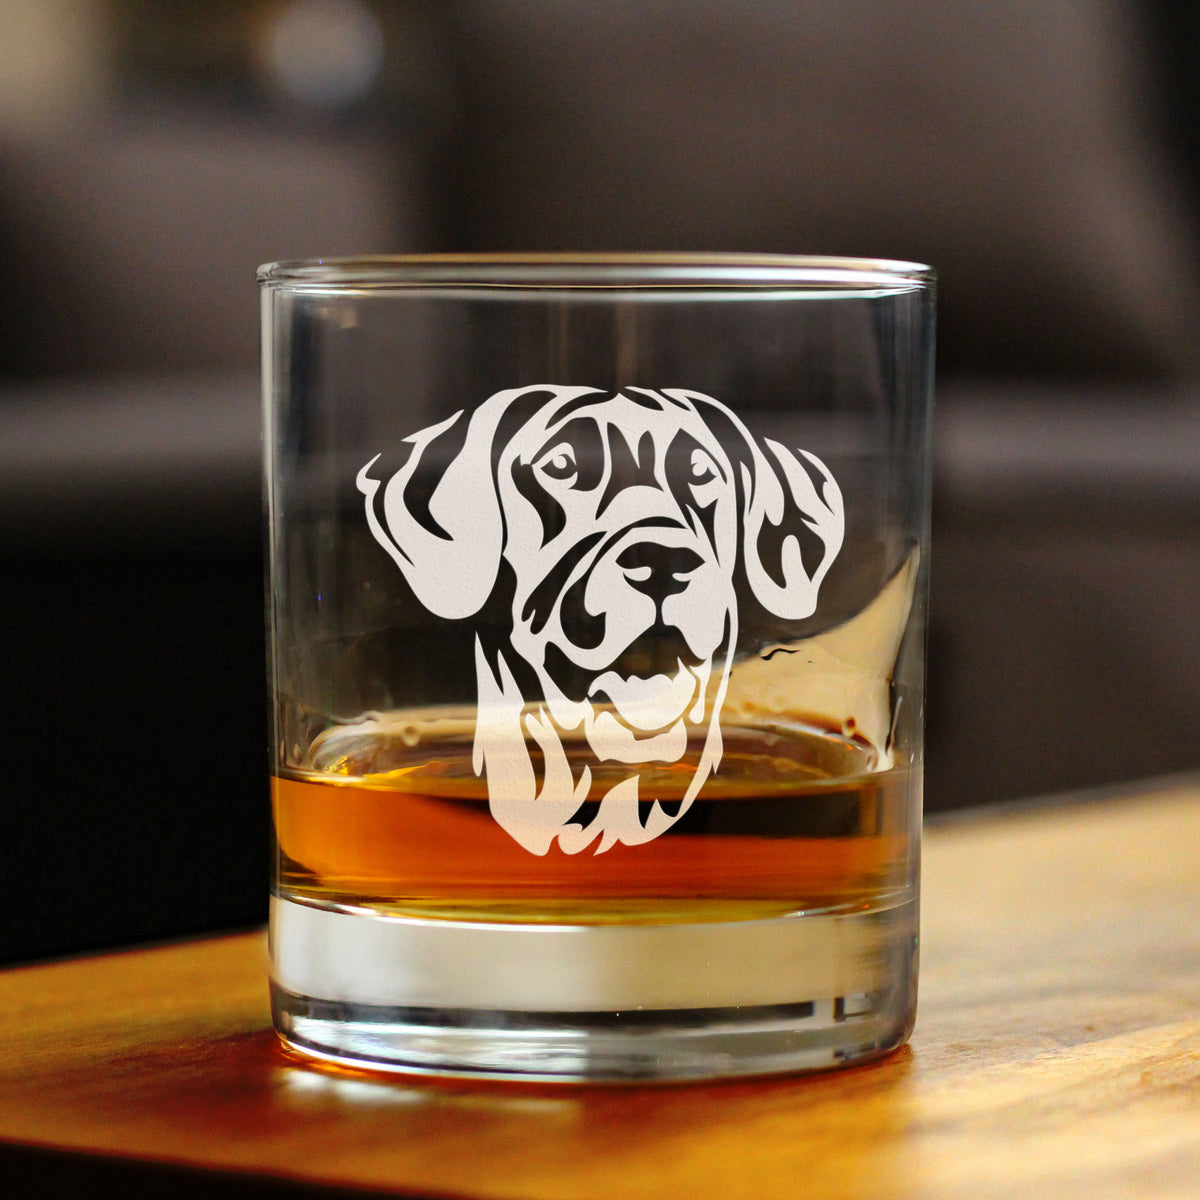 Great Dane Face Whiskey Rocks Glass - Unique Dog Themed Decor and Gifts for Moms &amp; Dads of Great Danes - 10.25 Oz